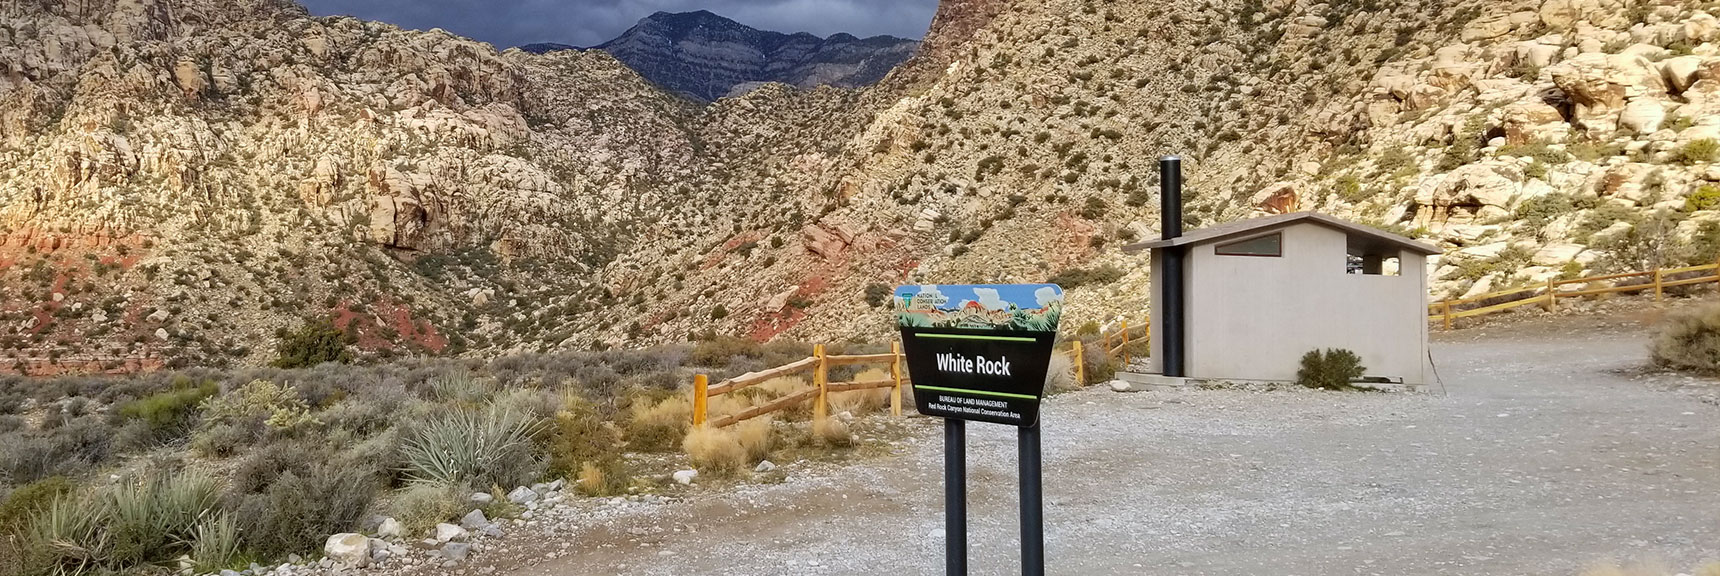 Trailhead at White Rock Mountain Loop in Red Rock Park, Nevada